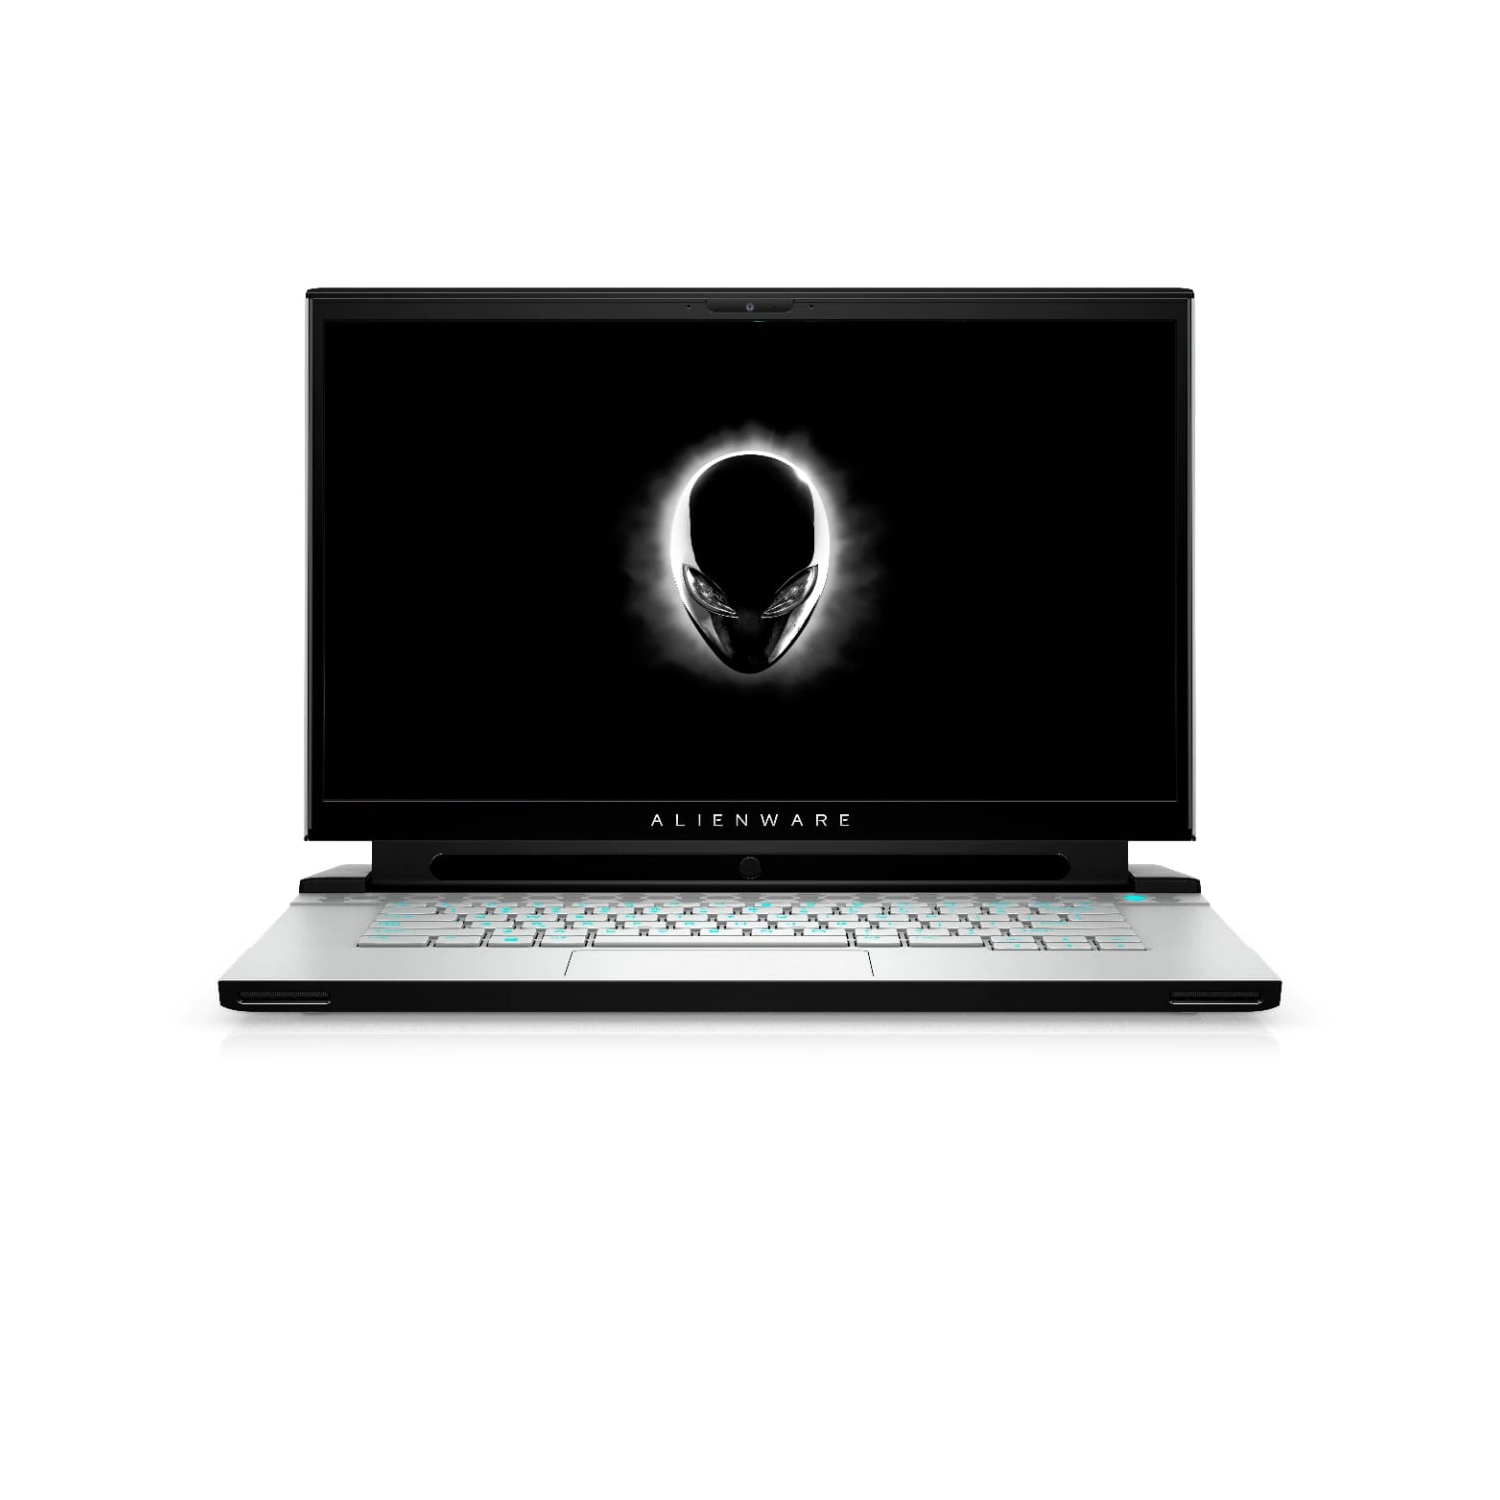 Refurbished (Excellent) - Dell Alienware m15 R3 Gaming Laptop (2020), 15.6" FHD, Core i7, 512GB SSD + 512GB SSD, 32GB RAM, RTX 2060, 5 GHz, 10th Gen CPU Certified